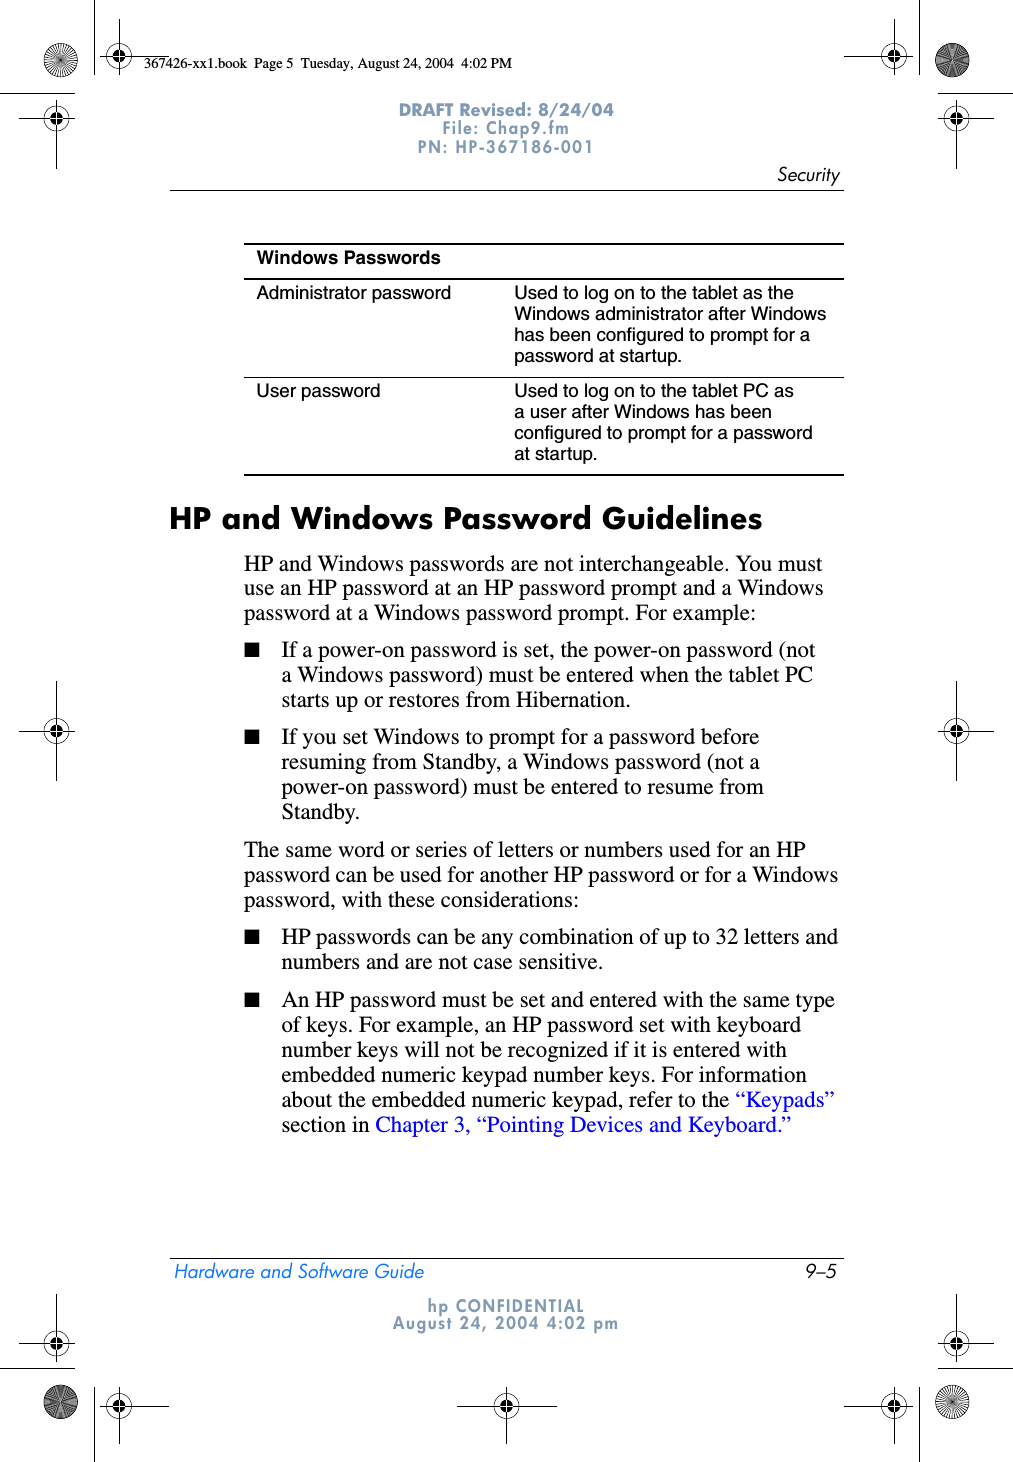 SecurityHardware and Software Guide 9–5DRAFT Revised: 8/24/04File: Chap9.fm PN: HP-367186-001 hp CONFIDENTIALAugust 24, 2004 4:02 pmHP and Windows Password GuidelinesHP and Windows passwords are not interchangeable. You must use an HP password at an HP password prompt and a Windows password at a Windows password prompt. For example:■If a power-on password is set, the power-on password (not a Windows password) must be entered when the tablet PC starts up or restores from Hibernation.■If you set Windows to prompt for a password before resuming from Standby, a Windows password (not a power-on password) must be entered to resume from Standby.The same word or series of letters or numbers used for an HP password can be used for another HP password or for a Windows password, with these considerations:■HP passwords can be any combination of up to 32 letters and numbers and are not case sensitive.■An HP password must be set and entered with the same type of keys. For example, an HP password set with keyboard number keys will not be recognized if it is entered with embedded numeric keypad number keys. For information about the embedded numeric keypad, refer to the “Keypads” section in Chapter 3, “Pointing Devices and Keyboard.”Windows PasswordsAdministrator password Used to log on to the tablet as the Windows administrator after Windows has been configured to prompt for a password at startup.User password Used to log on to the tablet PC as a user after Windows has been configured to prompt for a password at startup.367426-xx1.book  Page 5  Tuesday, August 24, 2004  4:02 PM